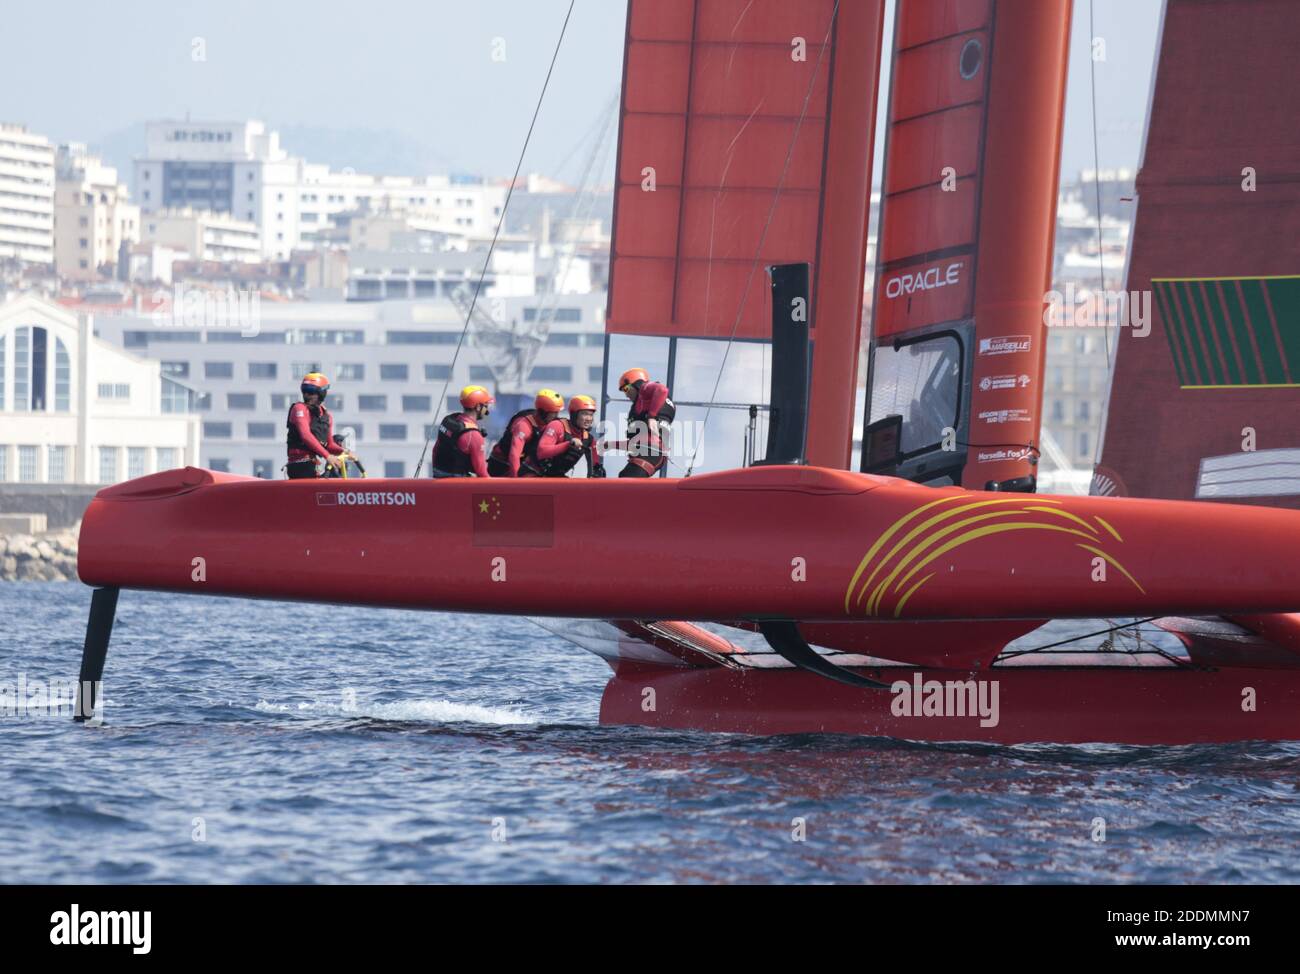 The SailGP F50 catamaran in racing during SailGP final in Marseille, France on September 19, 2019. SailGP is racing takes place in some of the most iconic harbors around the globe and culminates with a $1 million winner-takes-all match race. Rival national teams battle it out in identical supercharged F50 catamarans, engineered for intense racing at electrifying speeds exceeding 50 knots (nearly 60 mph/100 kph) and Marseille is the final event. Photo by Patrick Aventurier/ABACAPRESS.COM Stock Photo